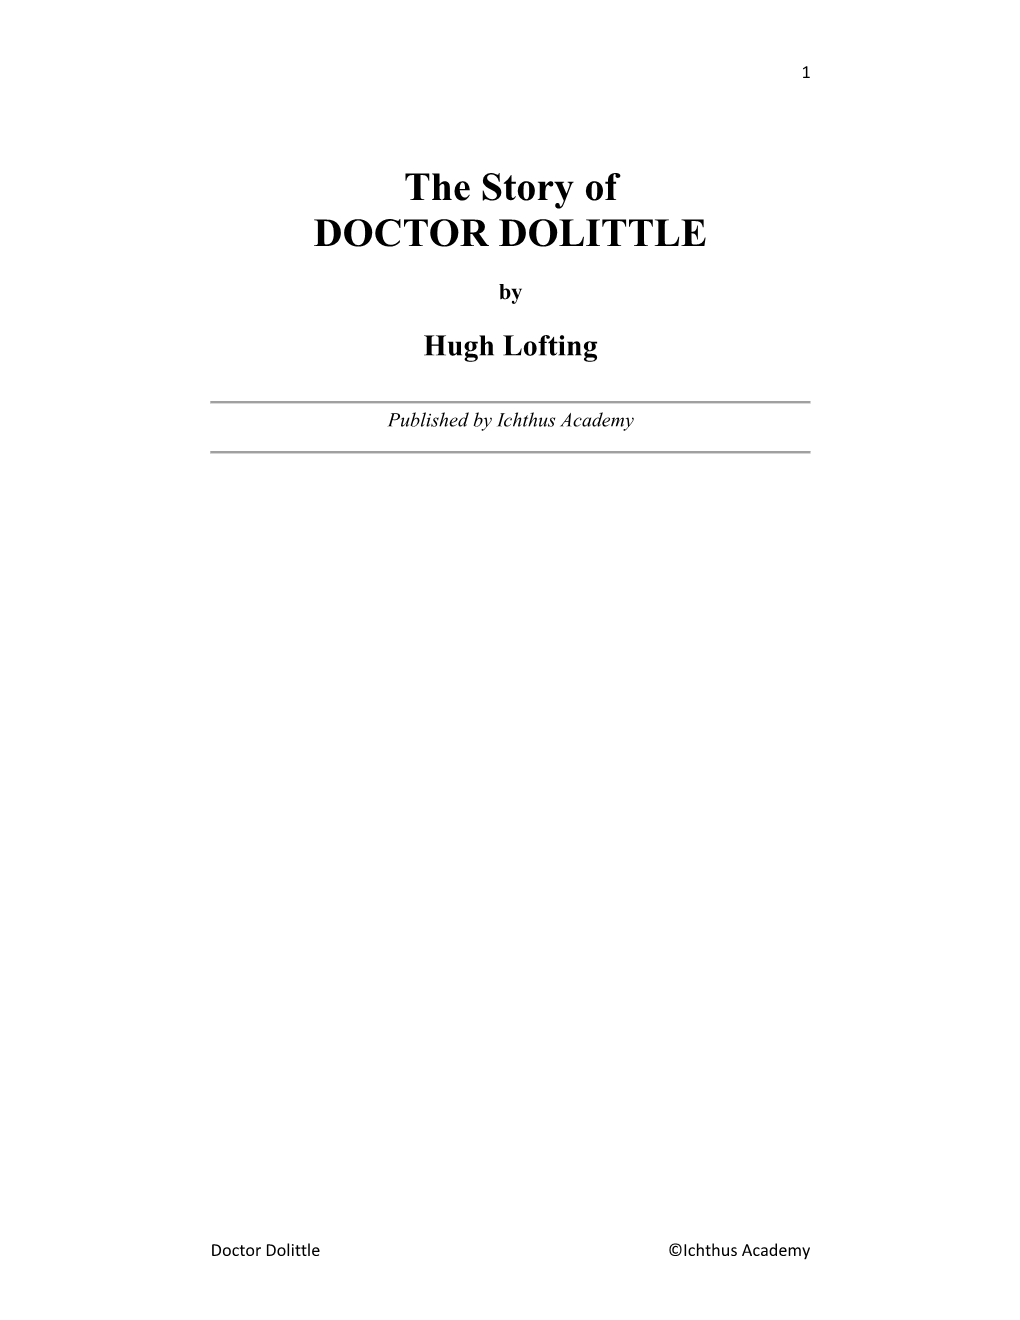 The Story of DOCTOR DOLITTLE